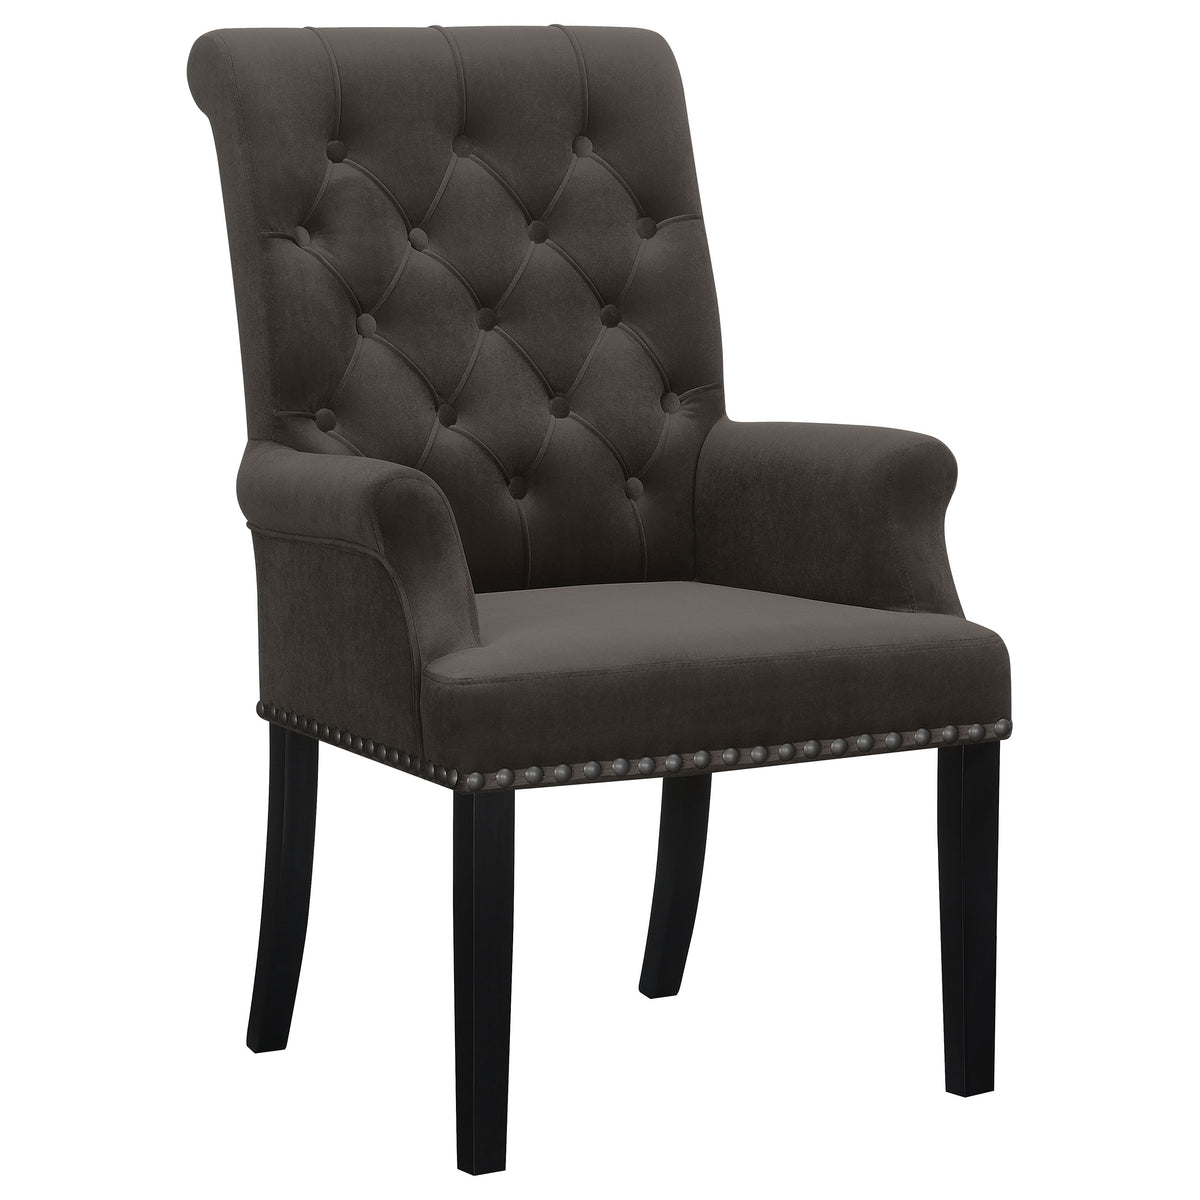 Alana Upholstered Tufted Arm Chair with Nailhead Trim  Half Price Furniture